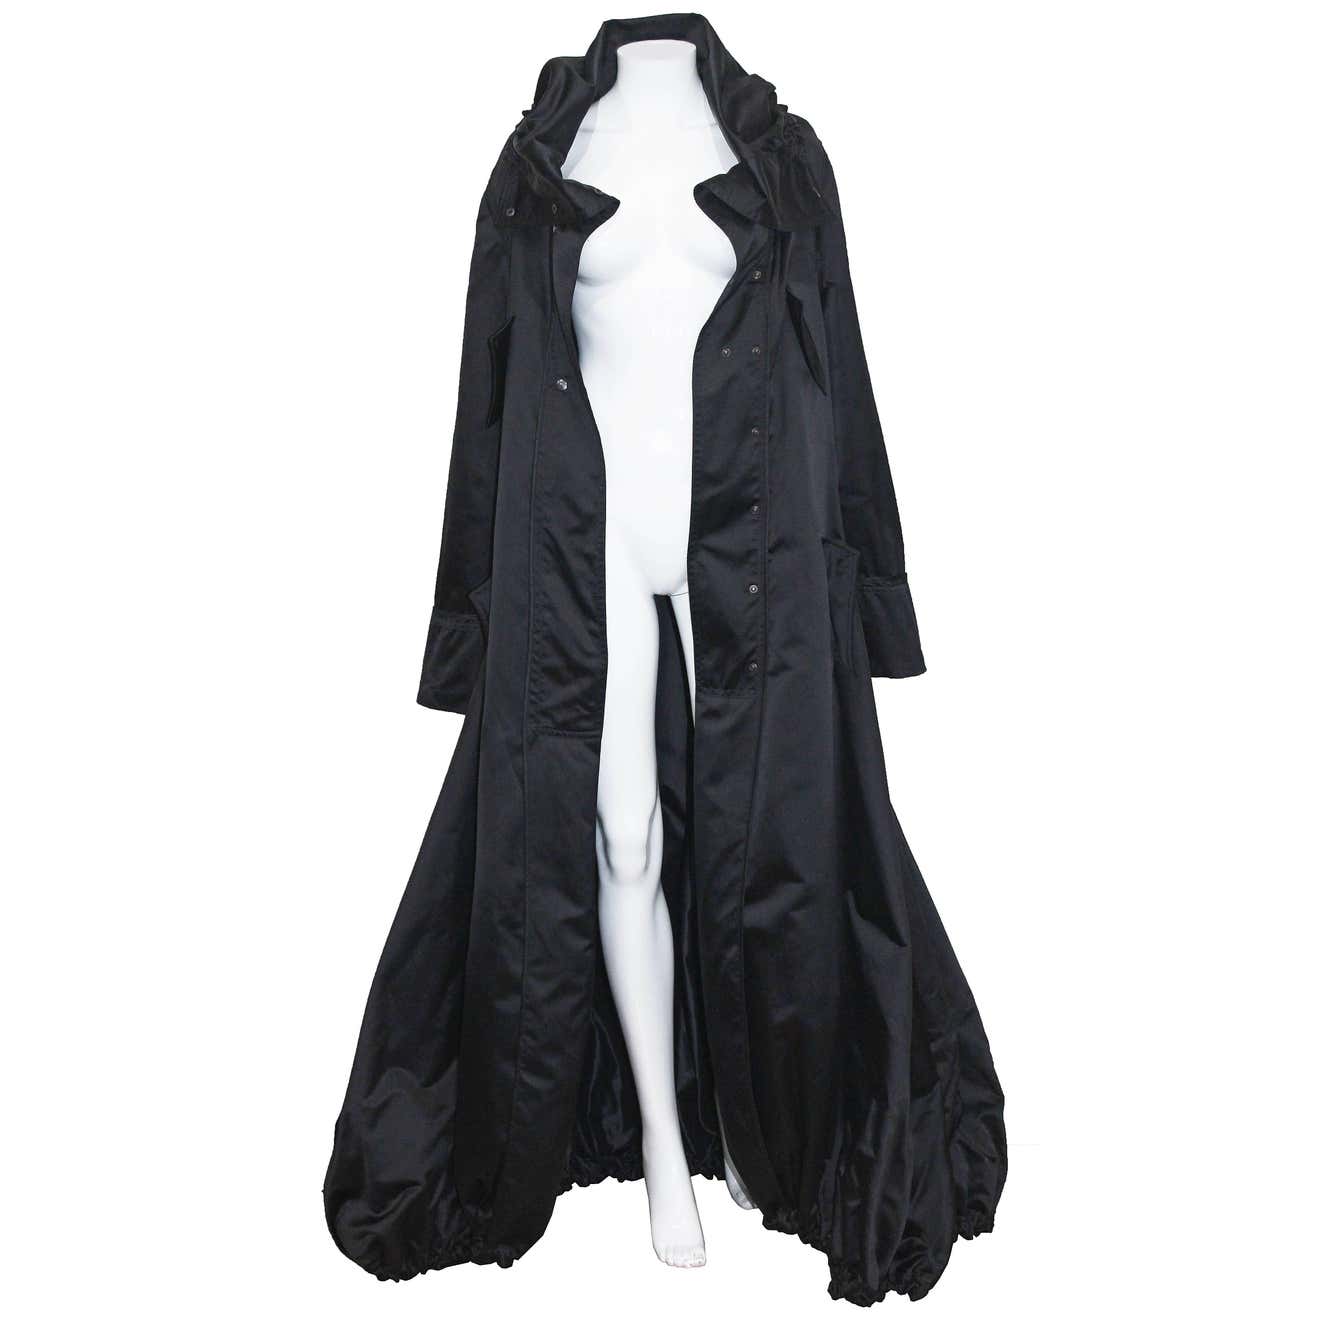 Exceptional Tom Ford for Gucci Runway Black Silk Parachute Coat, Fall ...